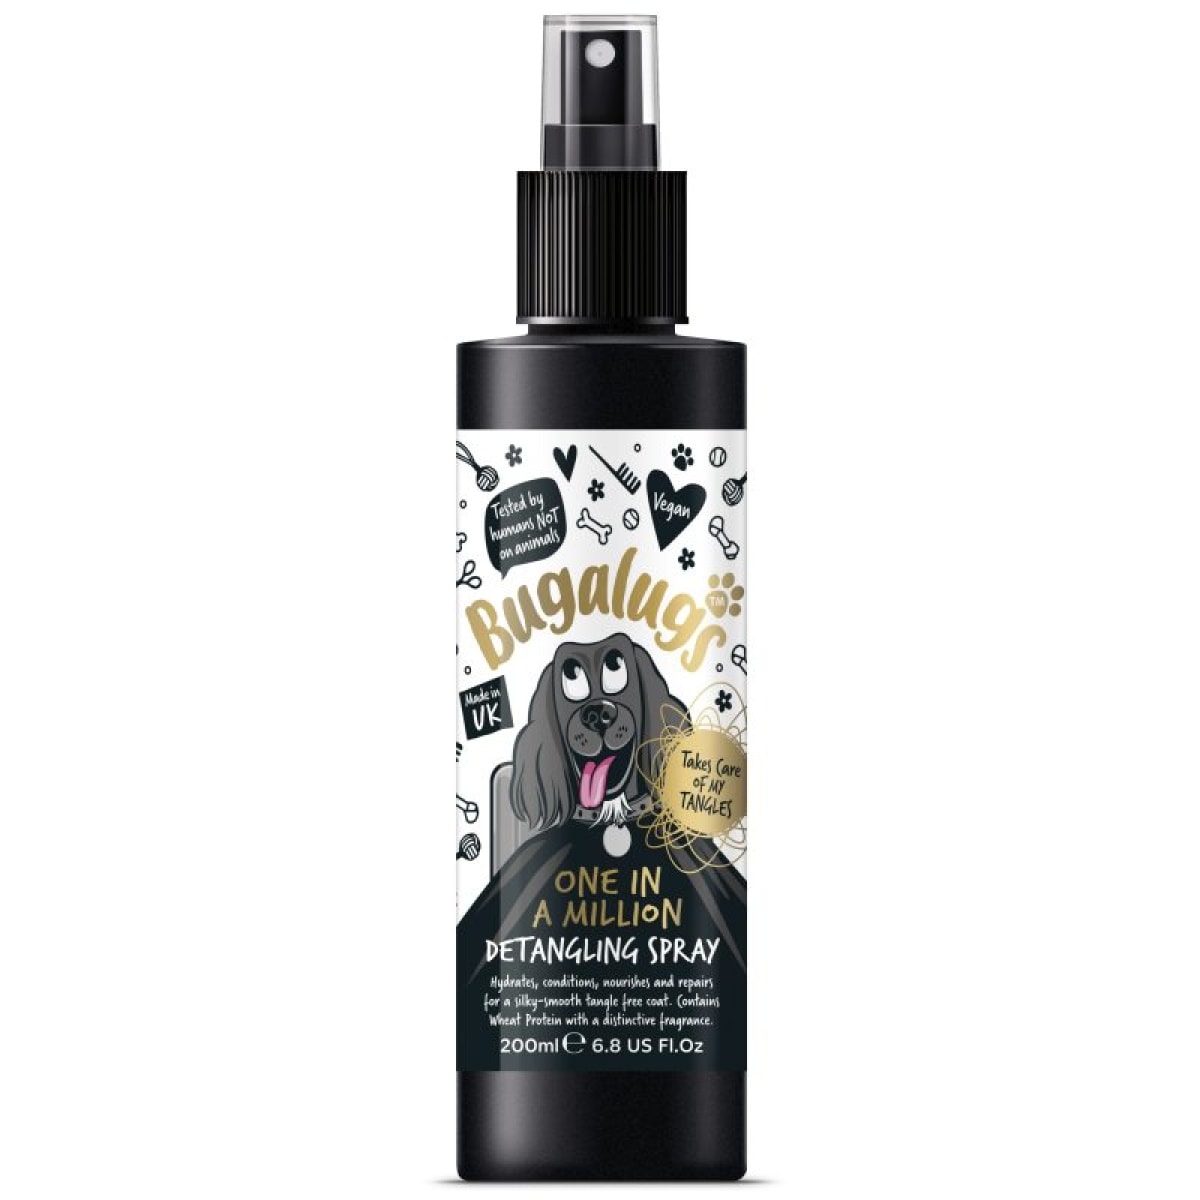 Bugalugs - One in a Million Detangling Spray 200ml Main Image